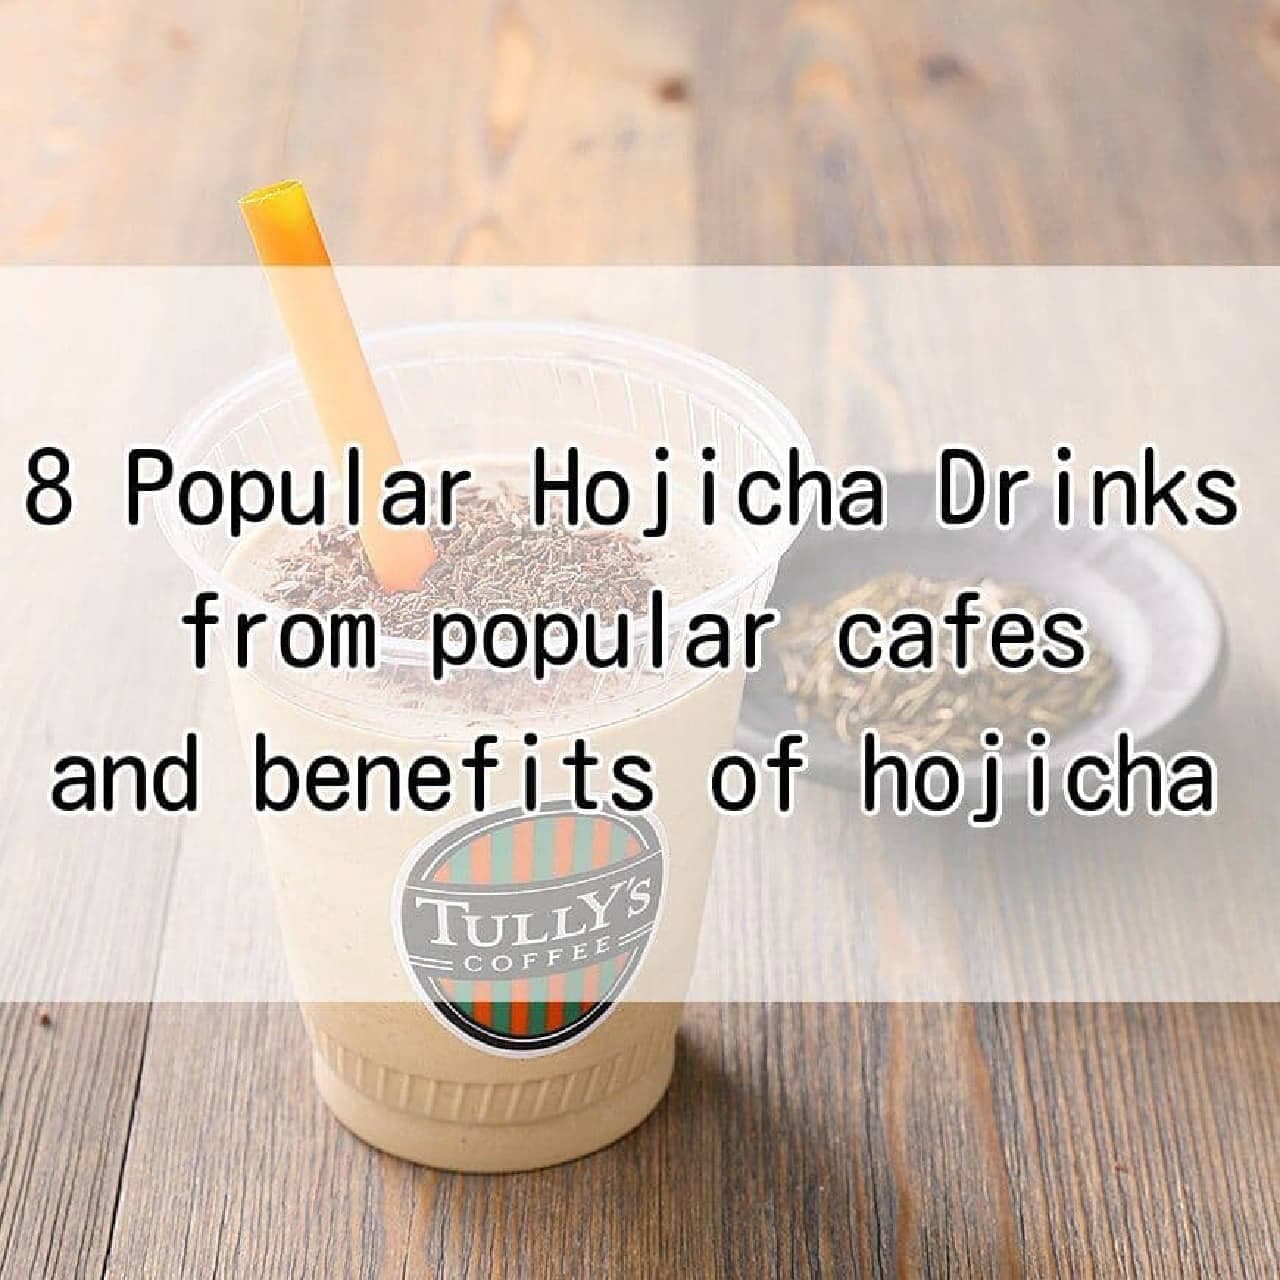 The Benefits of Hojicha and 8 Hojicha Drinks from Popular Cafes